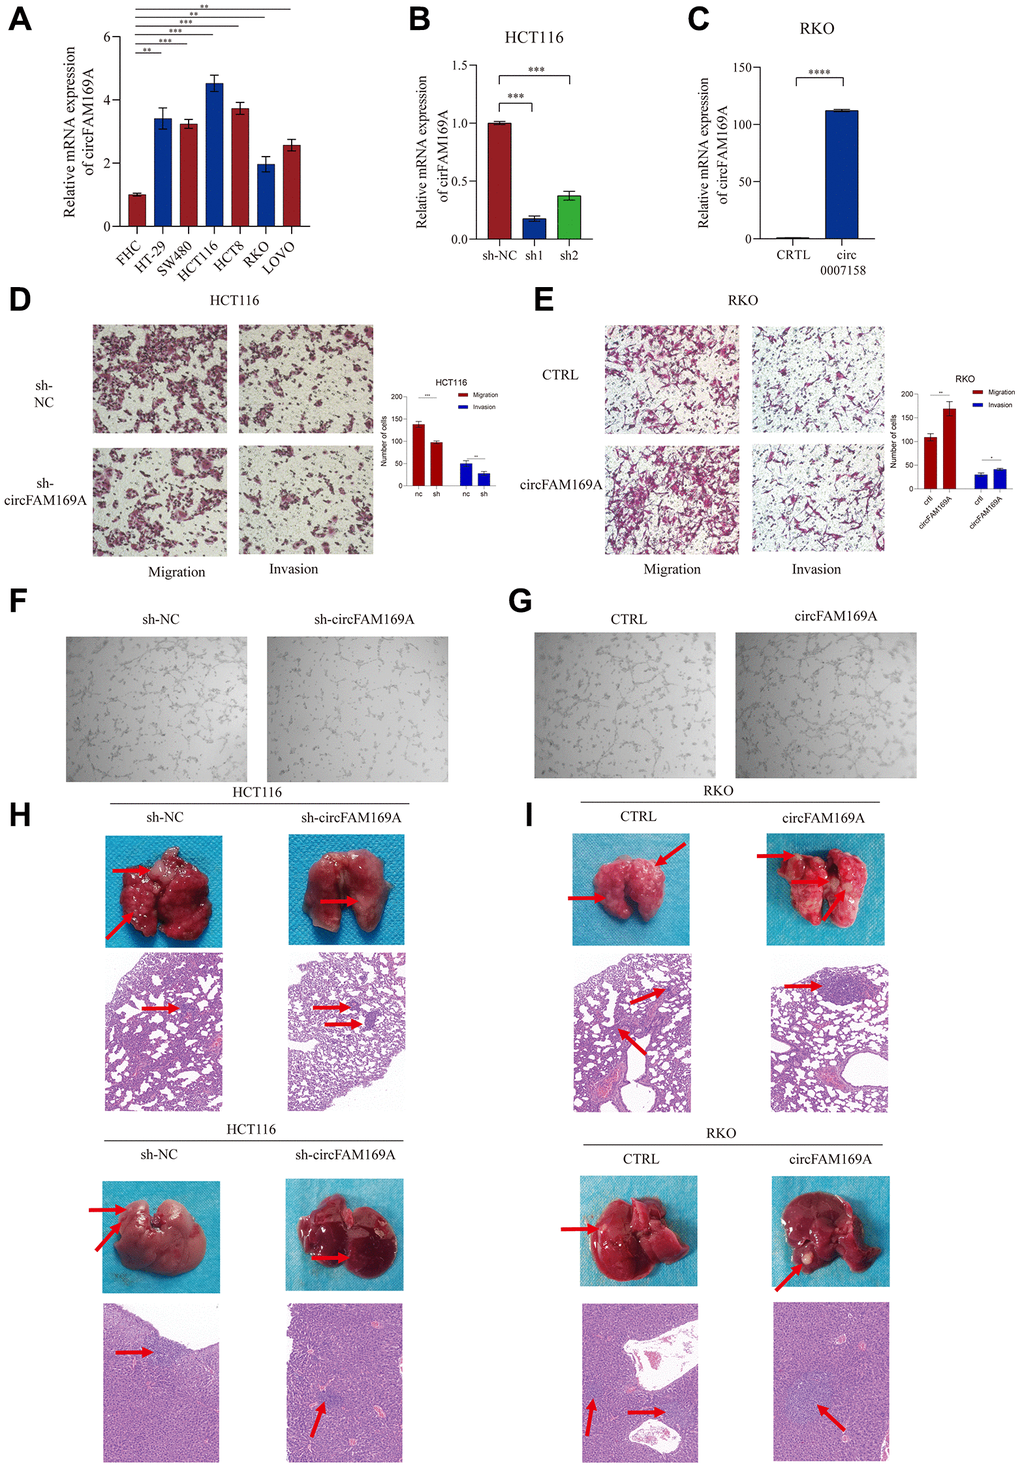 circFAM169A promotes CRC angiogenesis and metastasis in vitro and in vivo. (A) The expression of circFAM169A in FHC, HT29, SW480, HCT116, HCT8, LOVO, and RKO cells determined using qRT–PCR. All data are presented as means ± SD (n = 3 independent experiments). *p ≤ 0.05, **p ≤ 0.01, ***p ≤ 0.001, and ****p ≤ 0.0001. (B, C) Construction of stable inducible circFAM169A-knockdown or -overexpressed CRC cell lines. All data are presented as means ± SD (n = 3 independent experiments). ***p ≤ 0.001 and ****p ≤ 0.0001. (D, E) Transwell migration assay and Transwell invasion assay were performed using HCT116 and RKO cells. (F, G) An in vitro Matrigel tube formation assay was performed to evaluate the angiogenic ability of human umbilical vein endothelial cells (HUVECs). The representative micrographs are shown at 200× magnification. (H, I) Representative images and bar graphs of liver and lung metastases with circFAM169A-knocked down HCT116 cells (H) and circFAM169A-overexpressing SW480 cells (I) in a nude mouse metastatic tumor model.